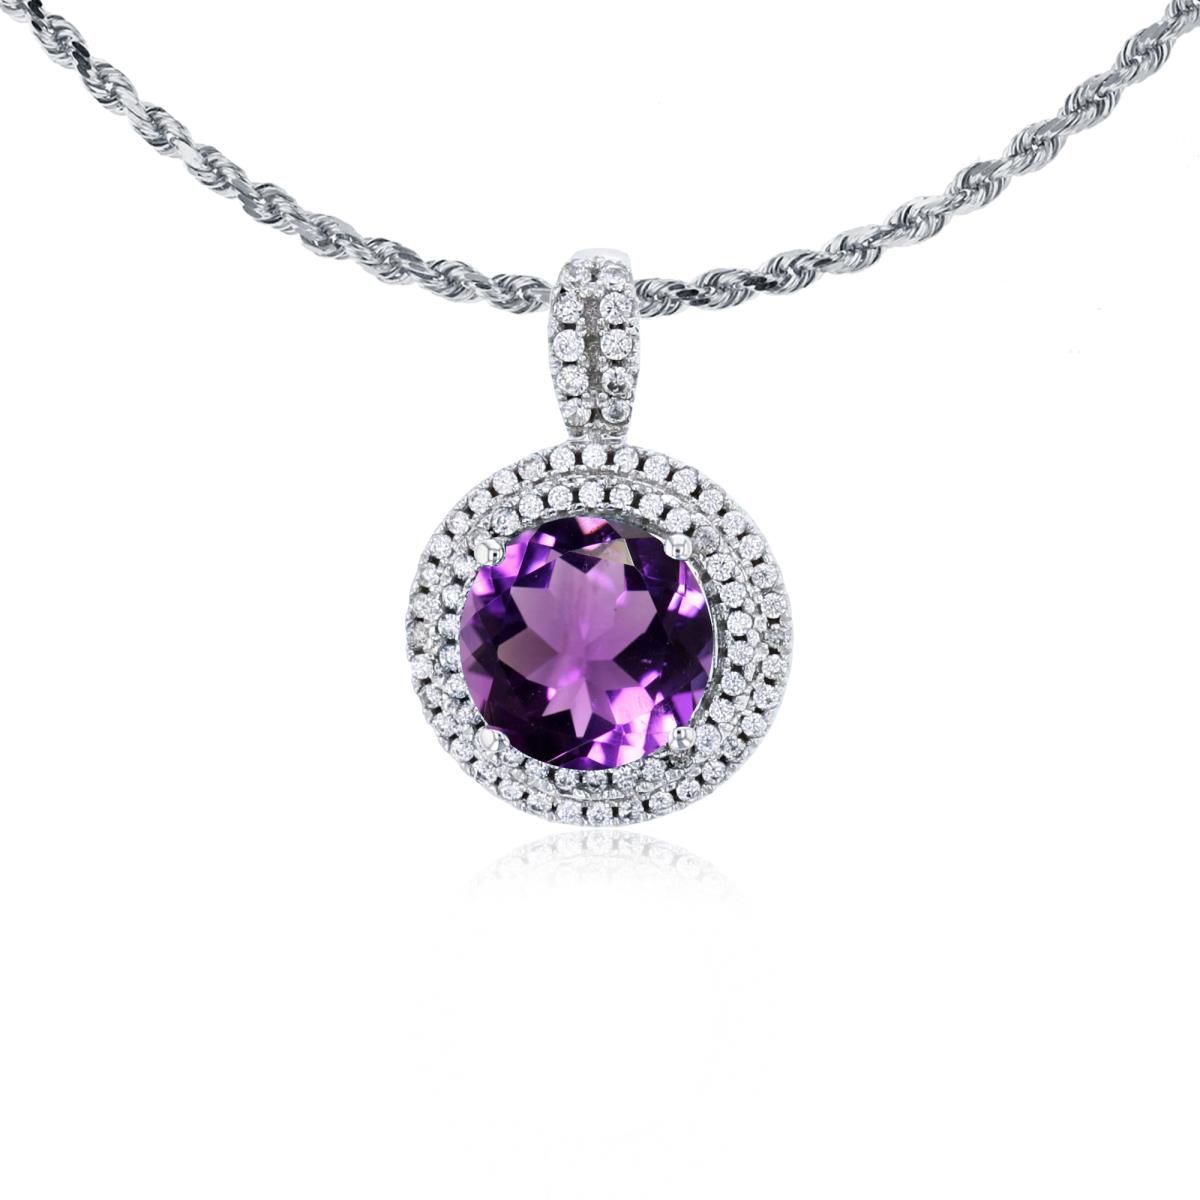 10K White Gold 7mm Round Amethyst & 0.25 CTTW Diamonds Double Halo 18" Rope Chain Necklace